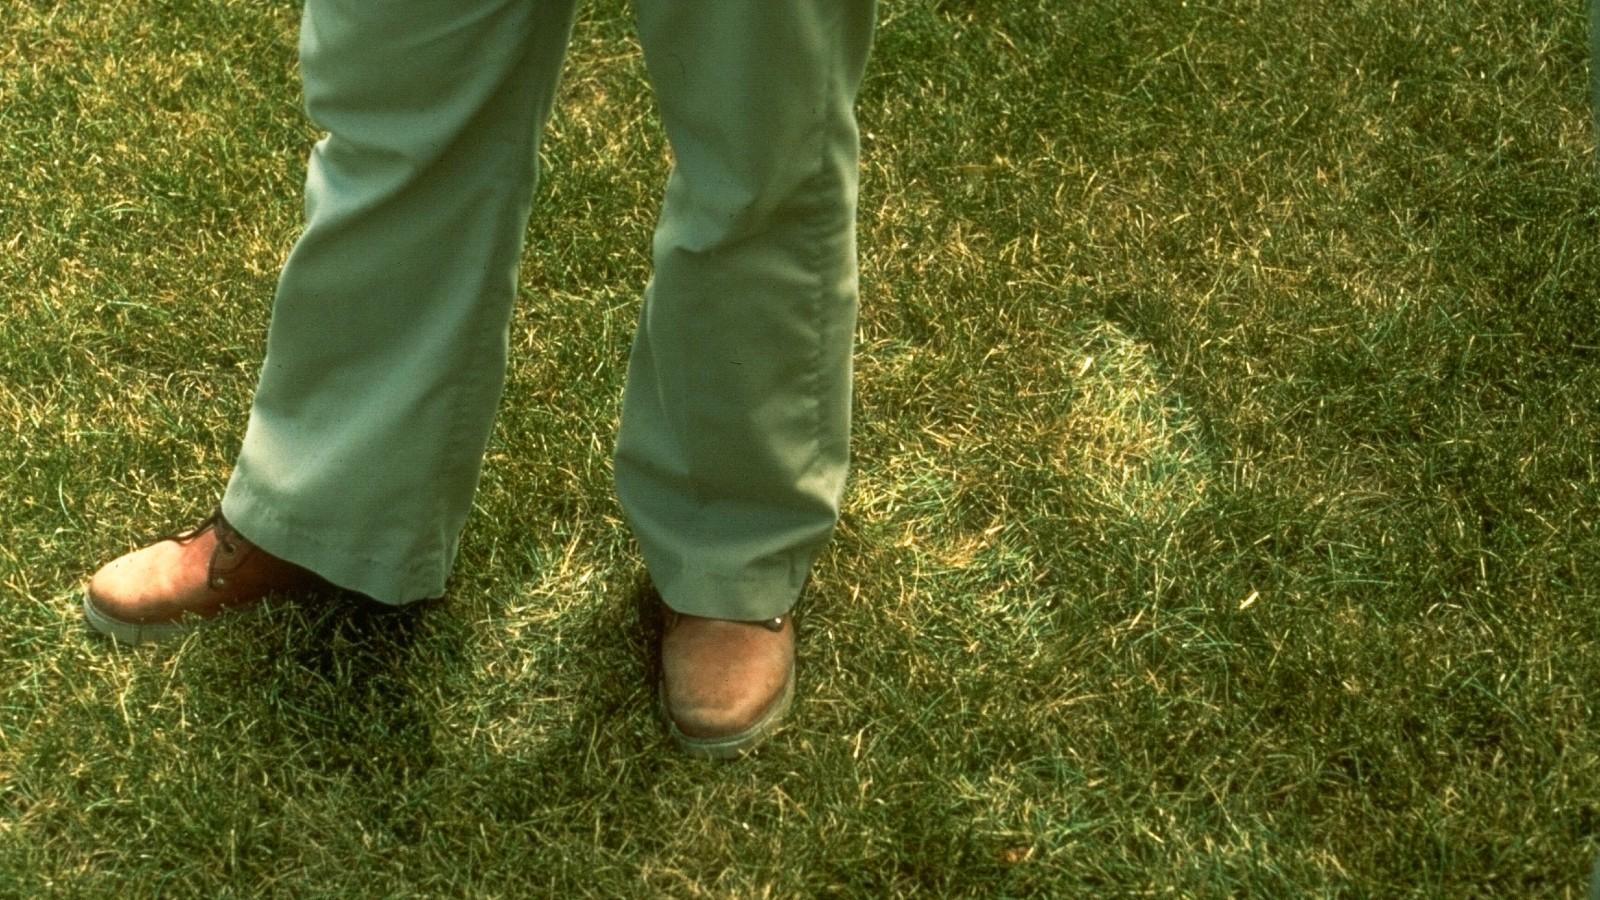 footprints on drought stressed lawn